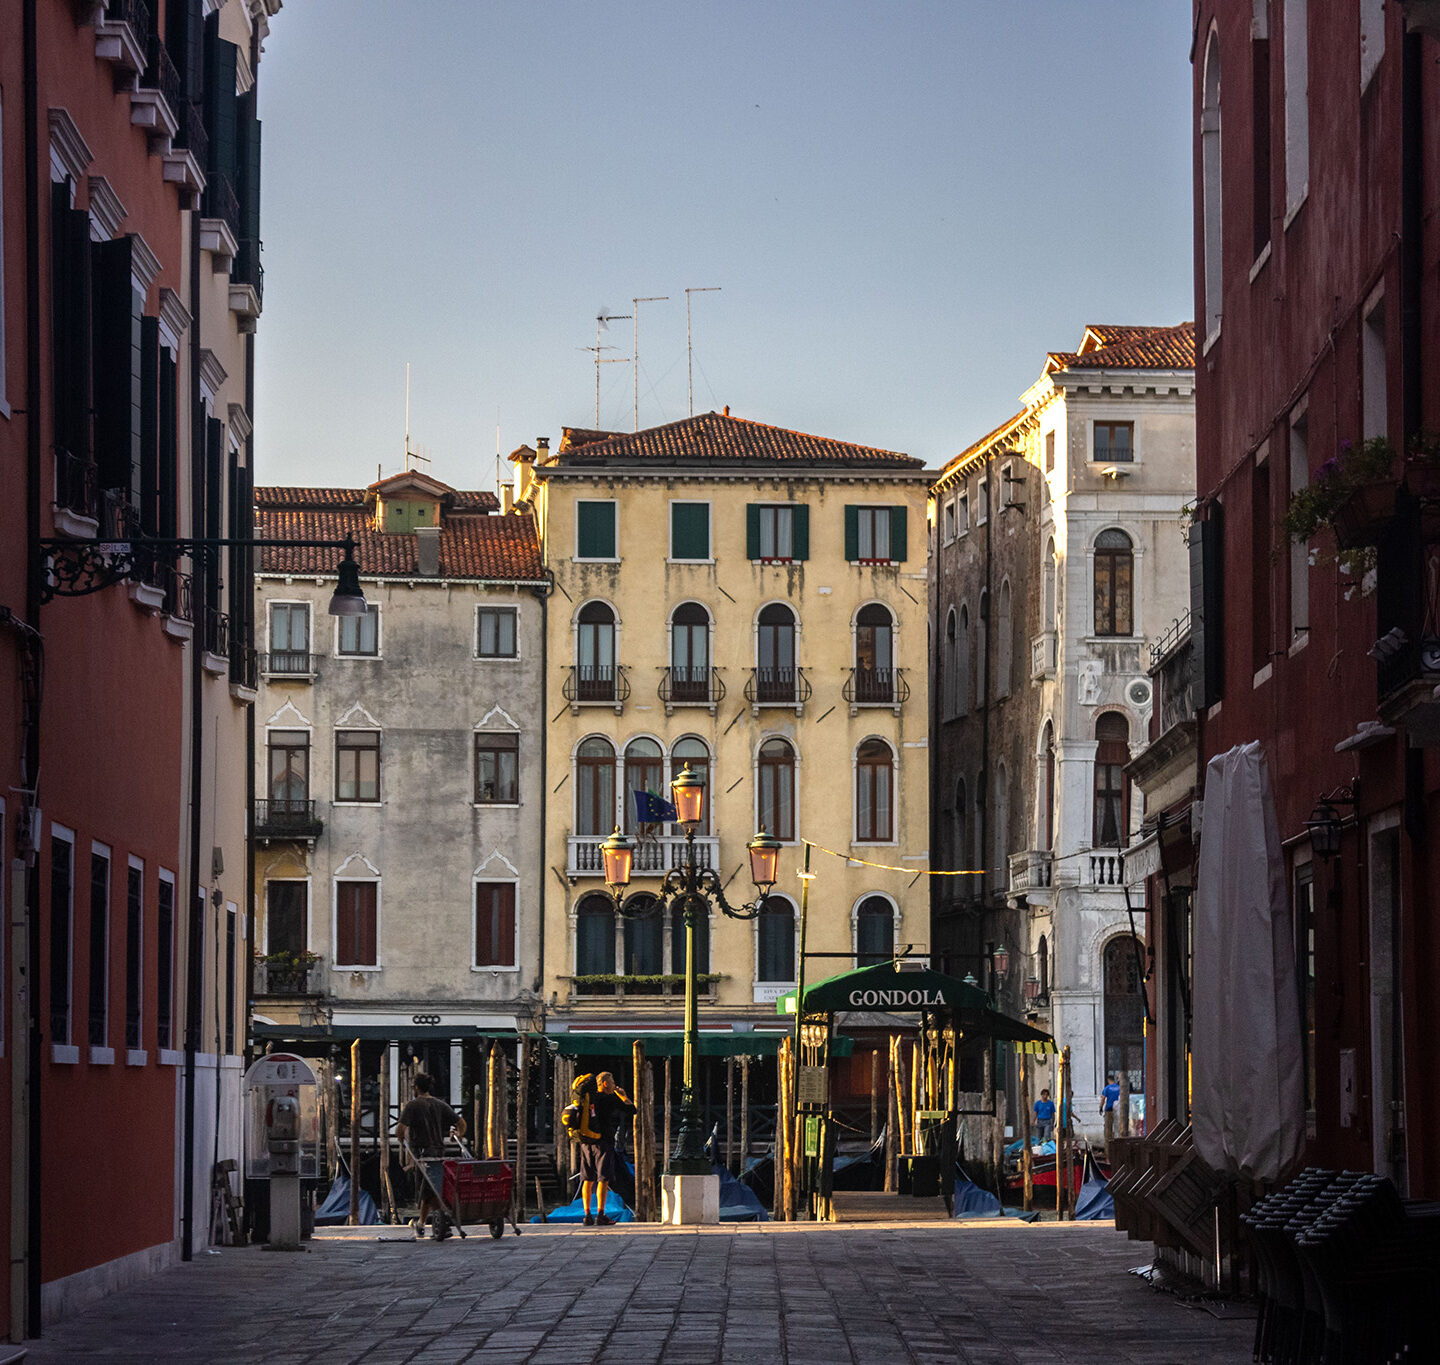 Street in Venice opens up to the canals where gondolas are lined up in the earl morning. The street is shrouded in darkness white the buildings on the opposite end of the canal gleam with light.